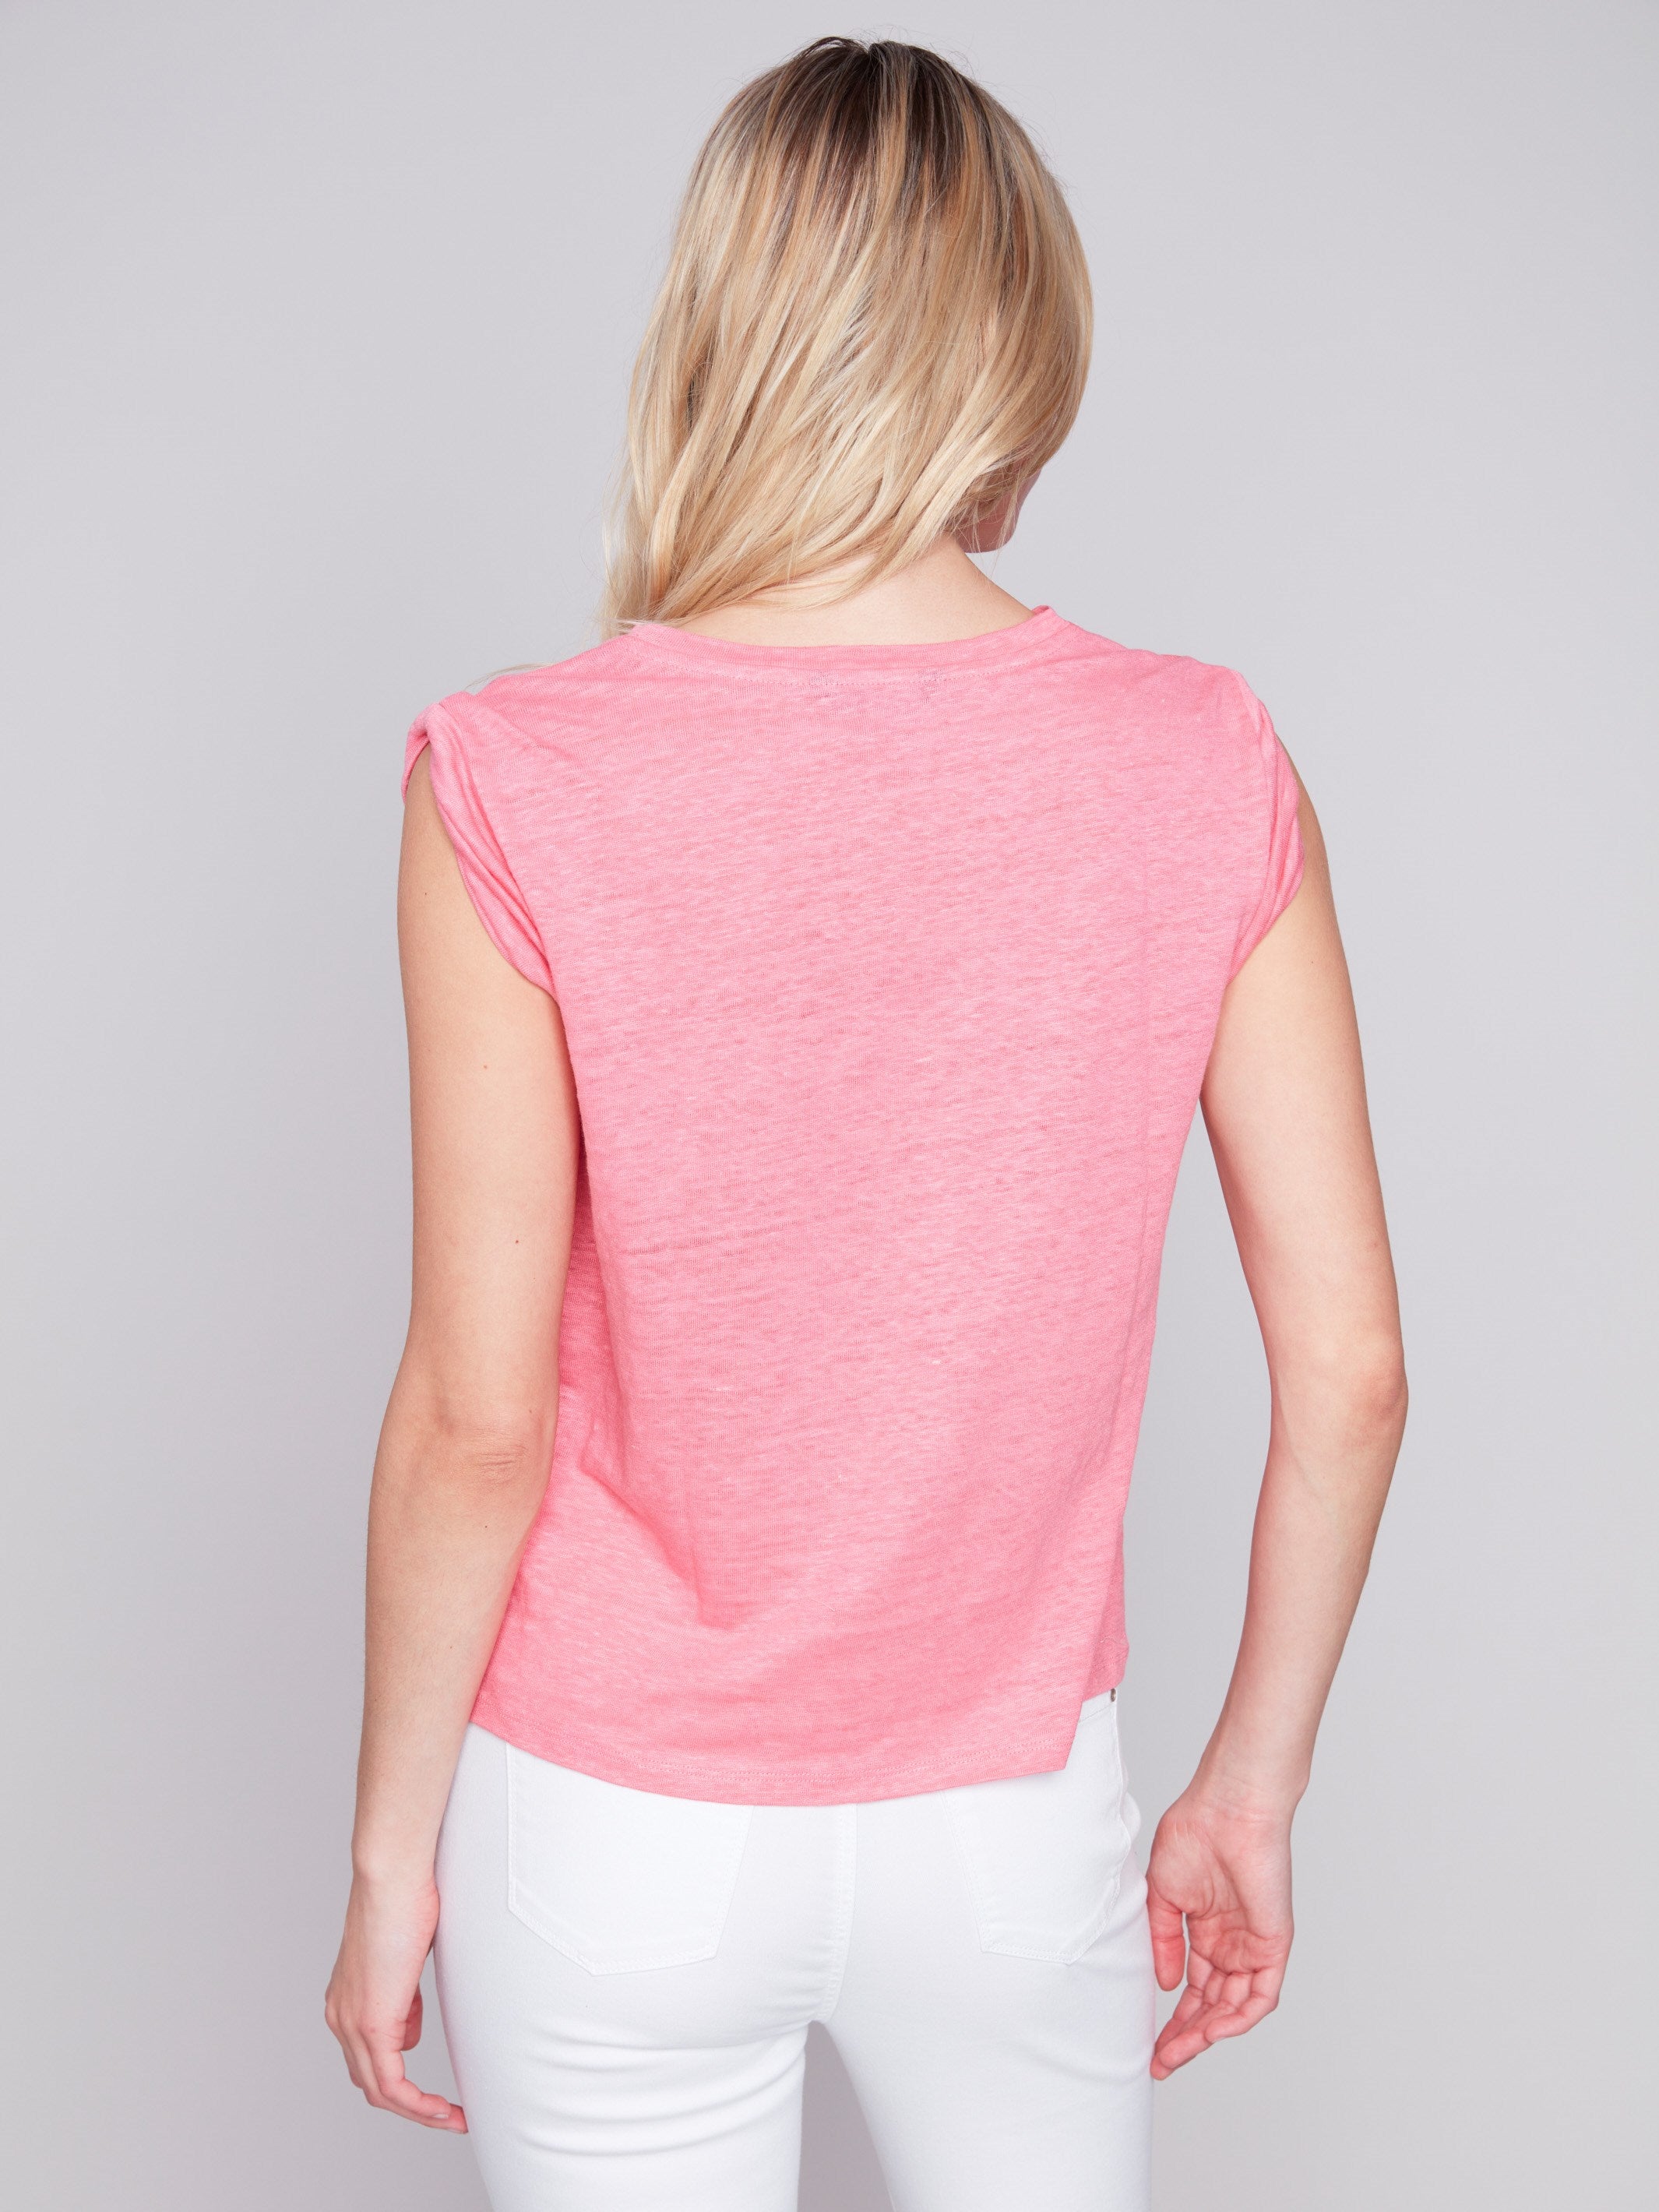 Linen Tank Top with Sleeve Detail - Flamingo - Charlie B Collection Canada - Image 2